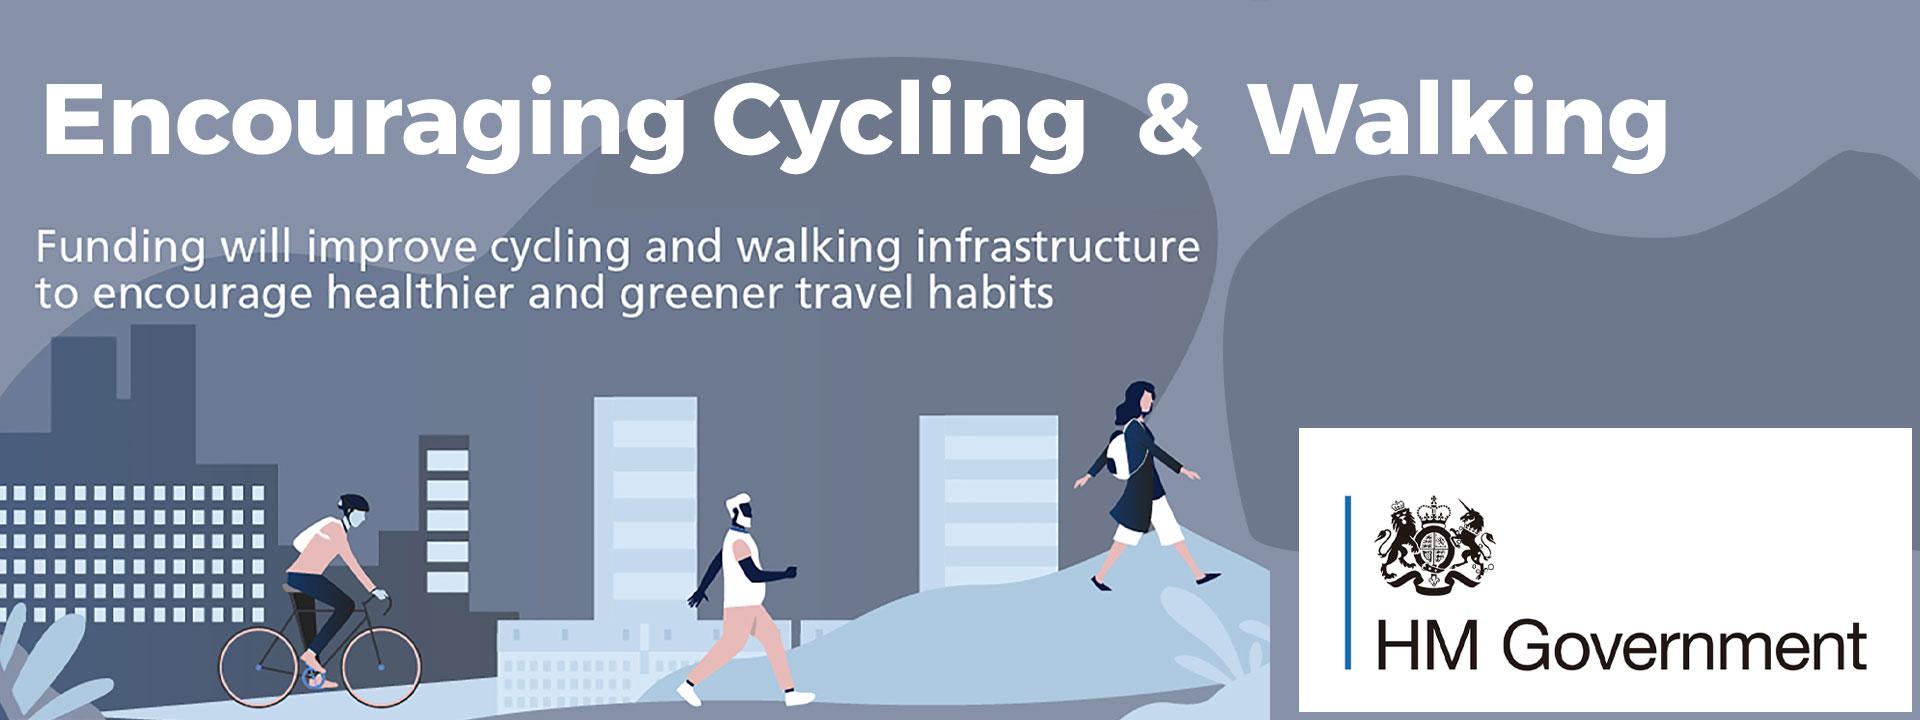 UK Government's £2 billion package for cycling & walking